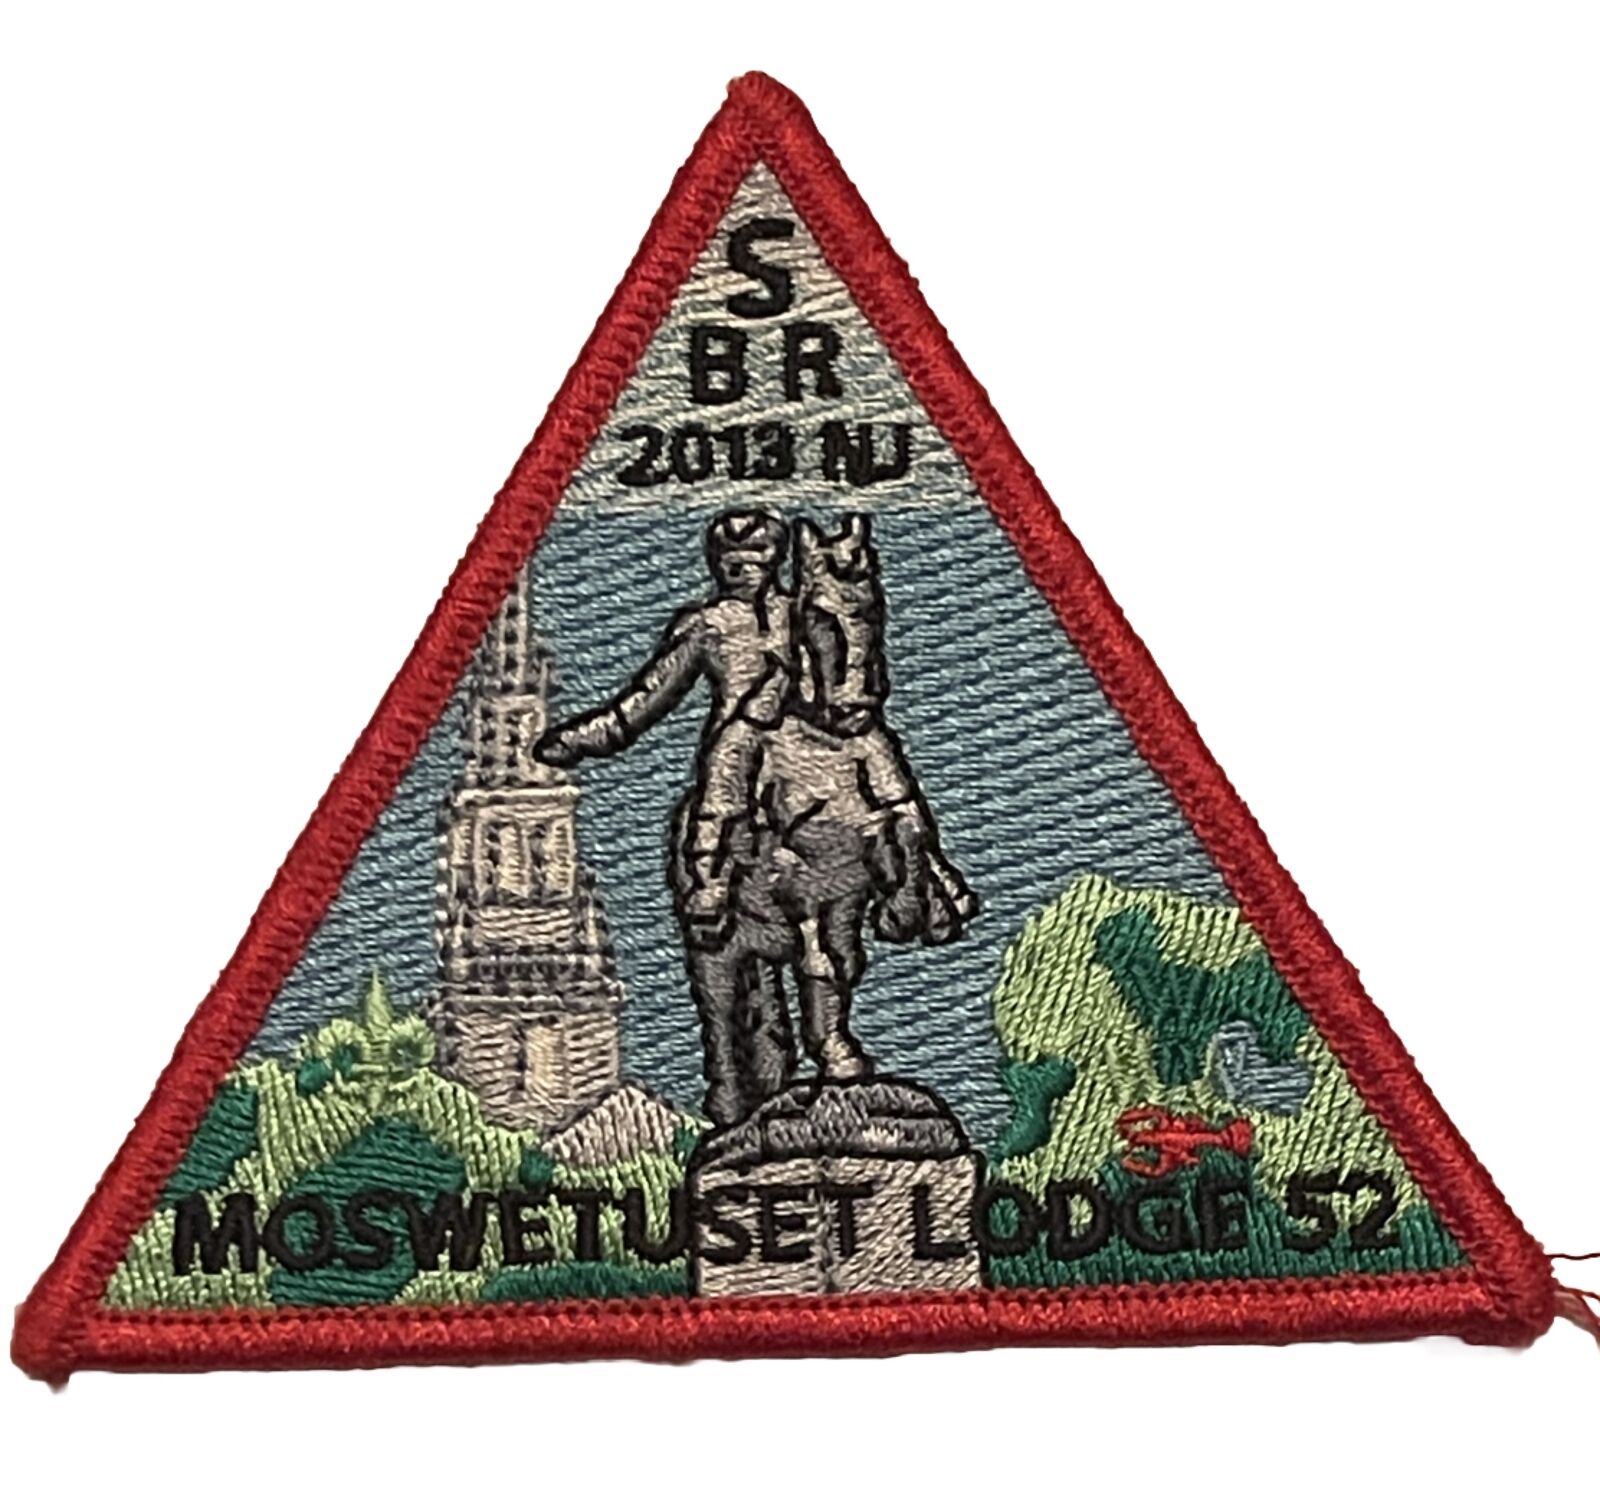 OA Patch Moswetuset Lodge 52 SBR 2013 National Jamboree Order Of The Arrow WWW